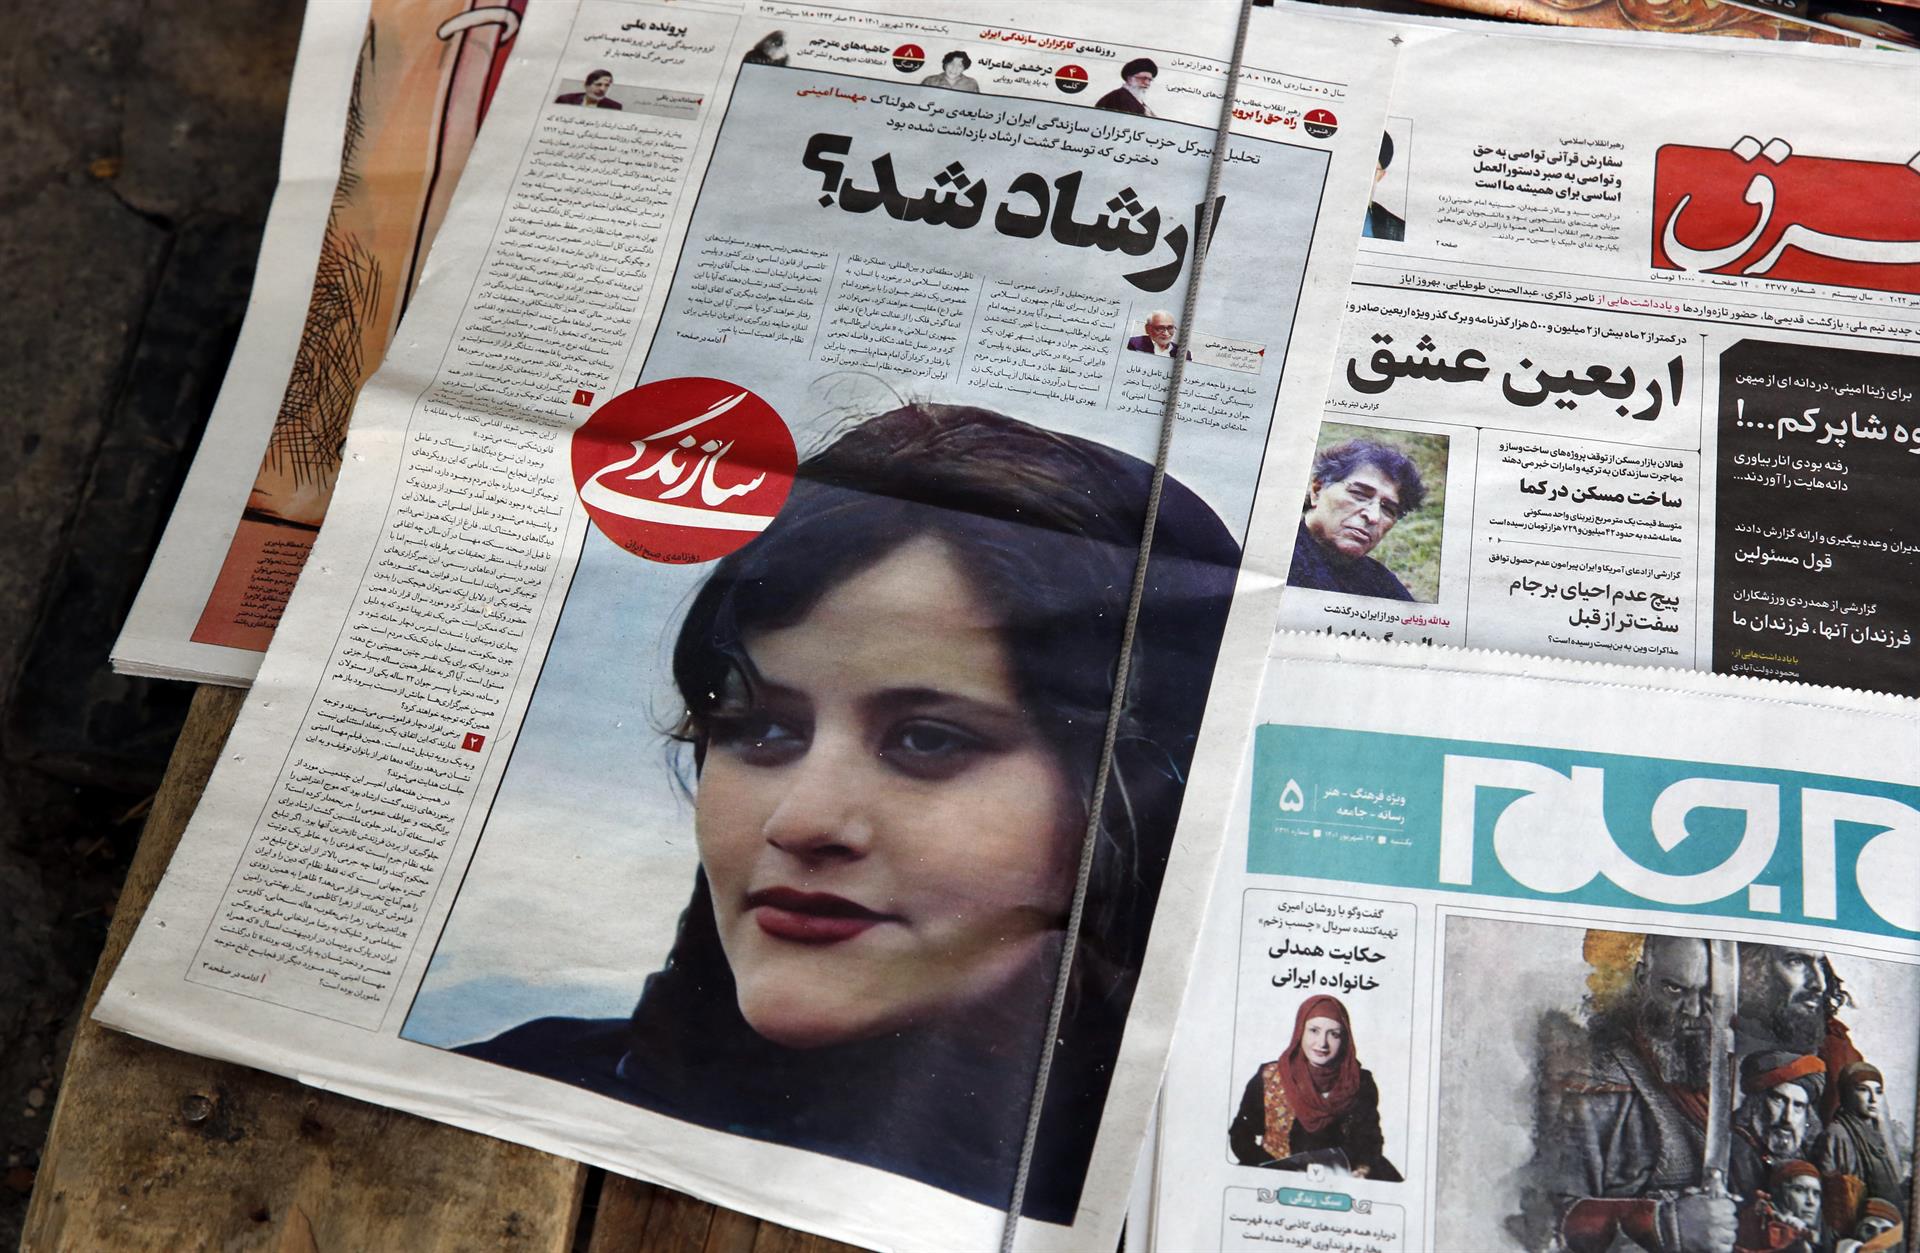 Iranian newspaper with a picture of Mahsa Amini, a young woman who died in police custody after being arrested for wrongly wearing the Islamic veil.